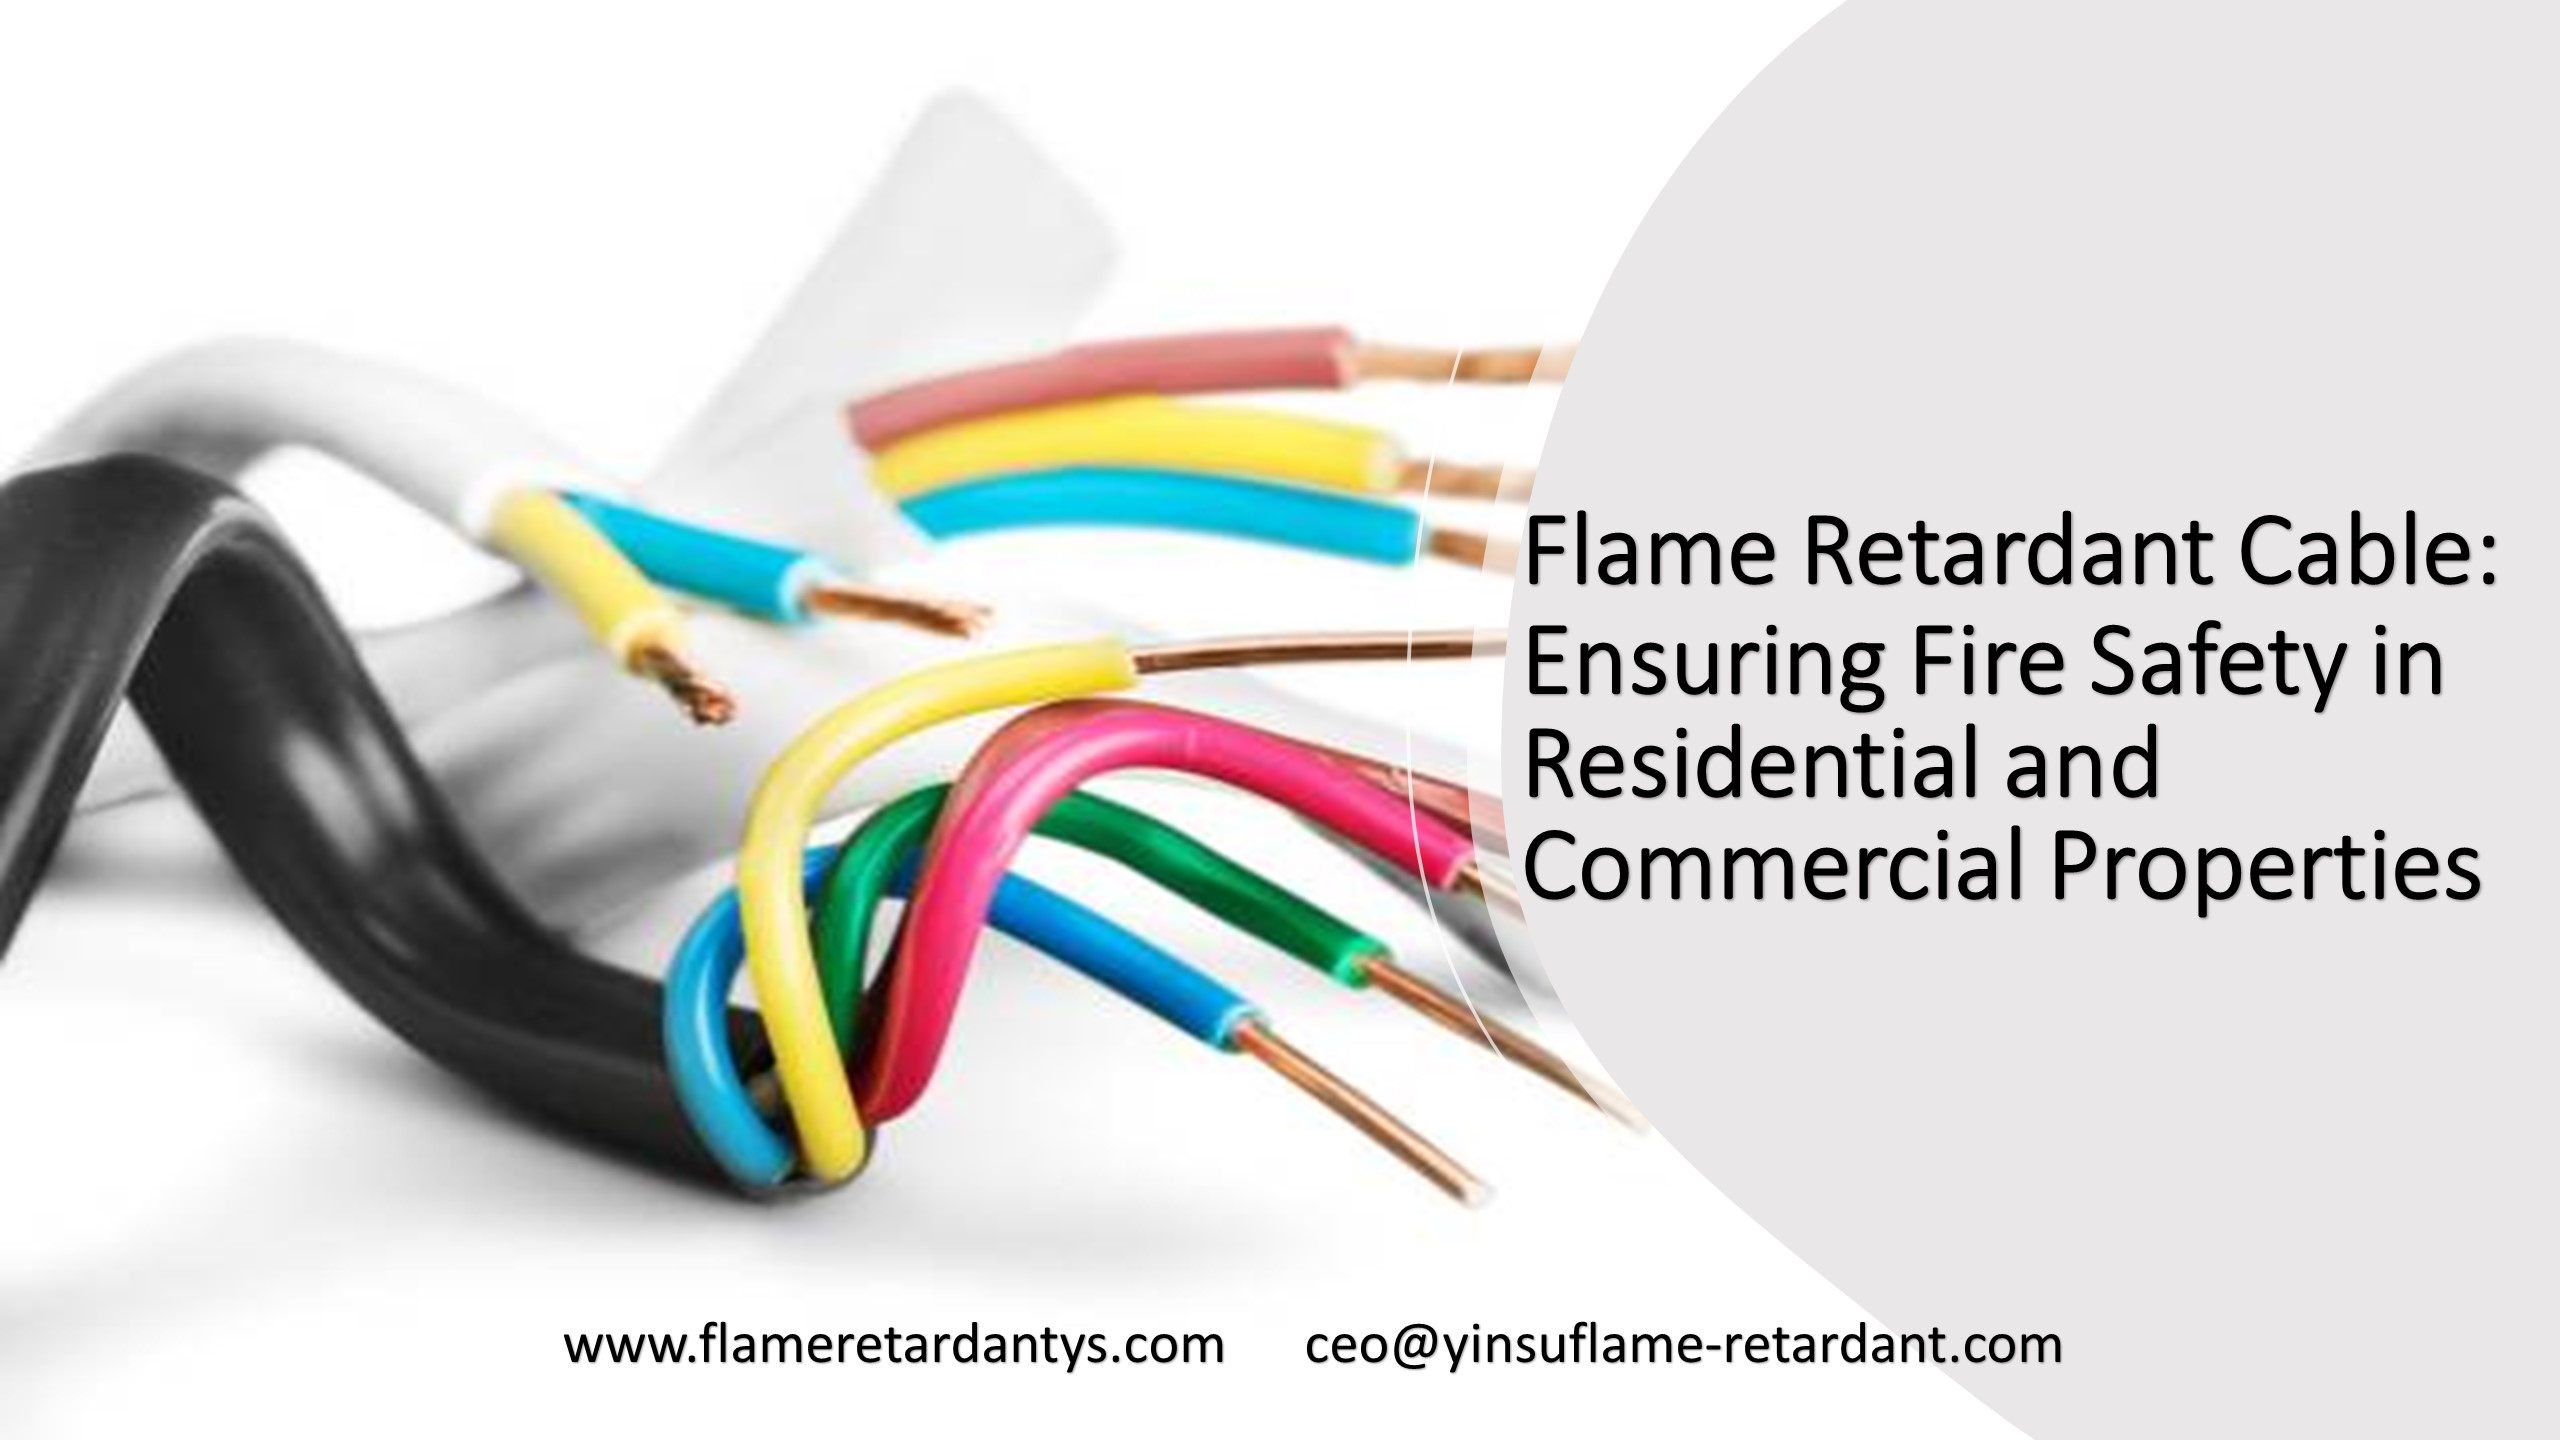 Flame Retardant Cable: Ensuring Fire Safety in Residential and Commercial Properties